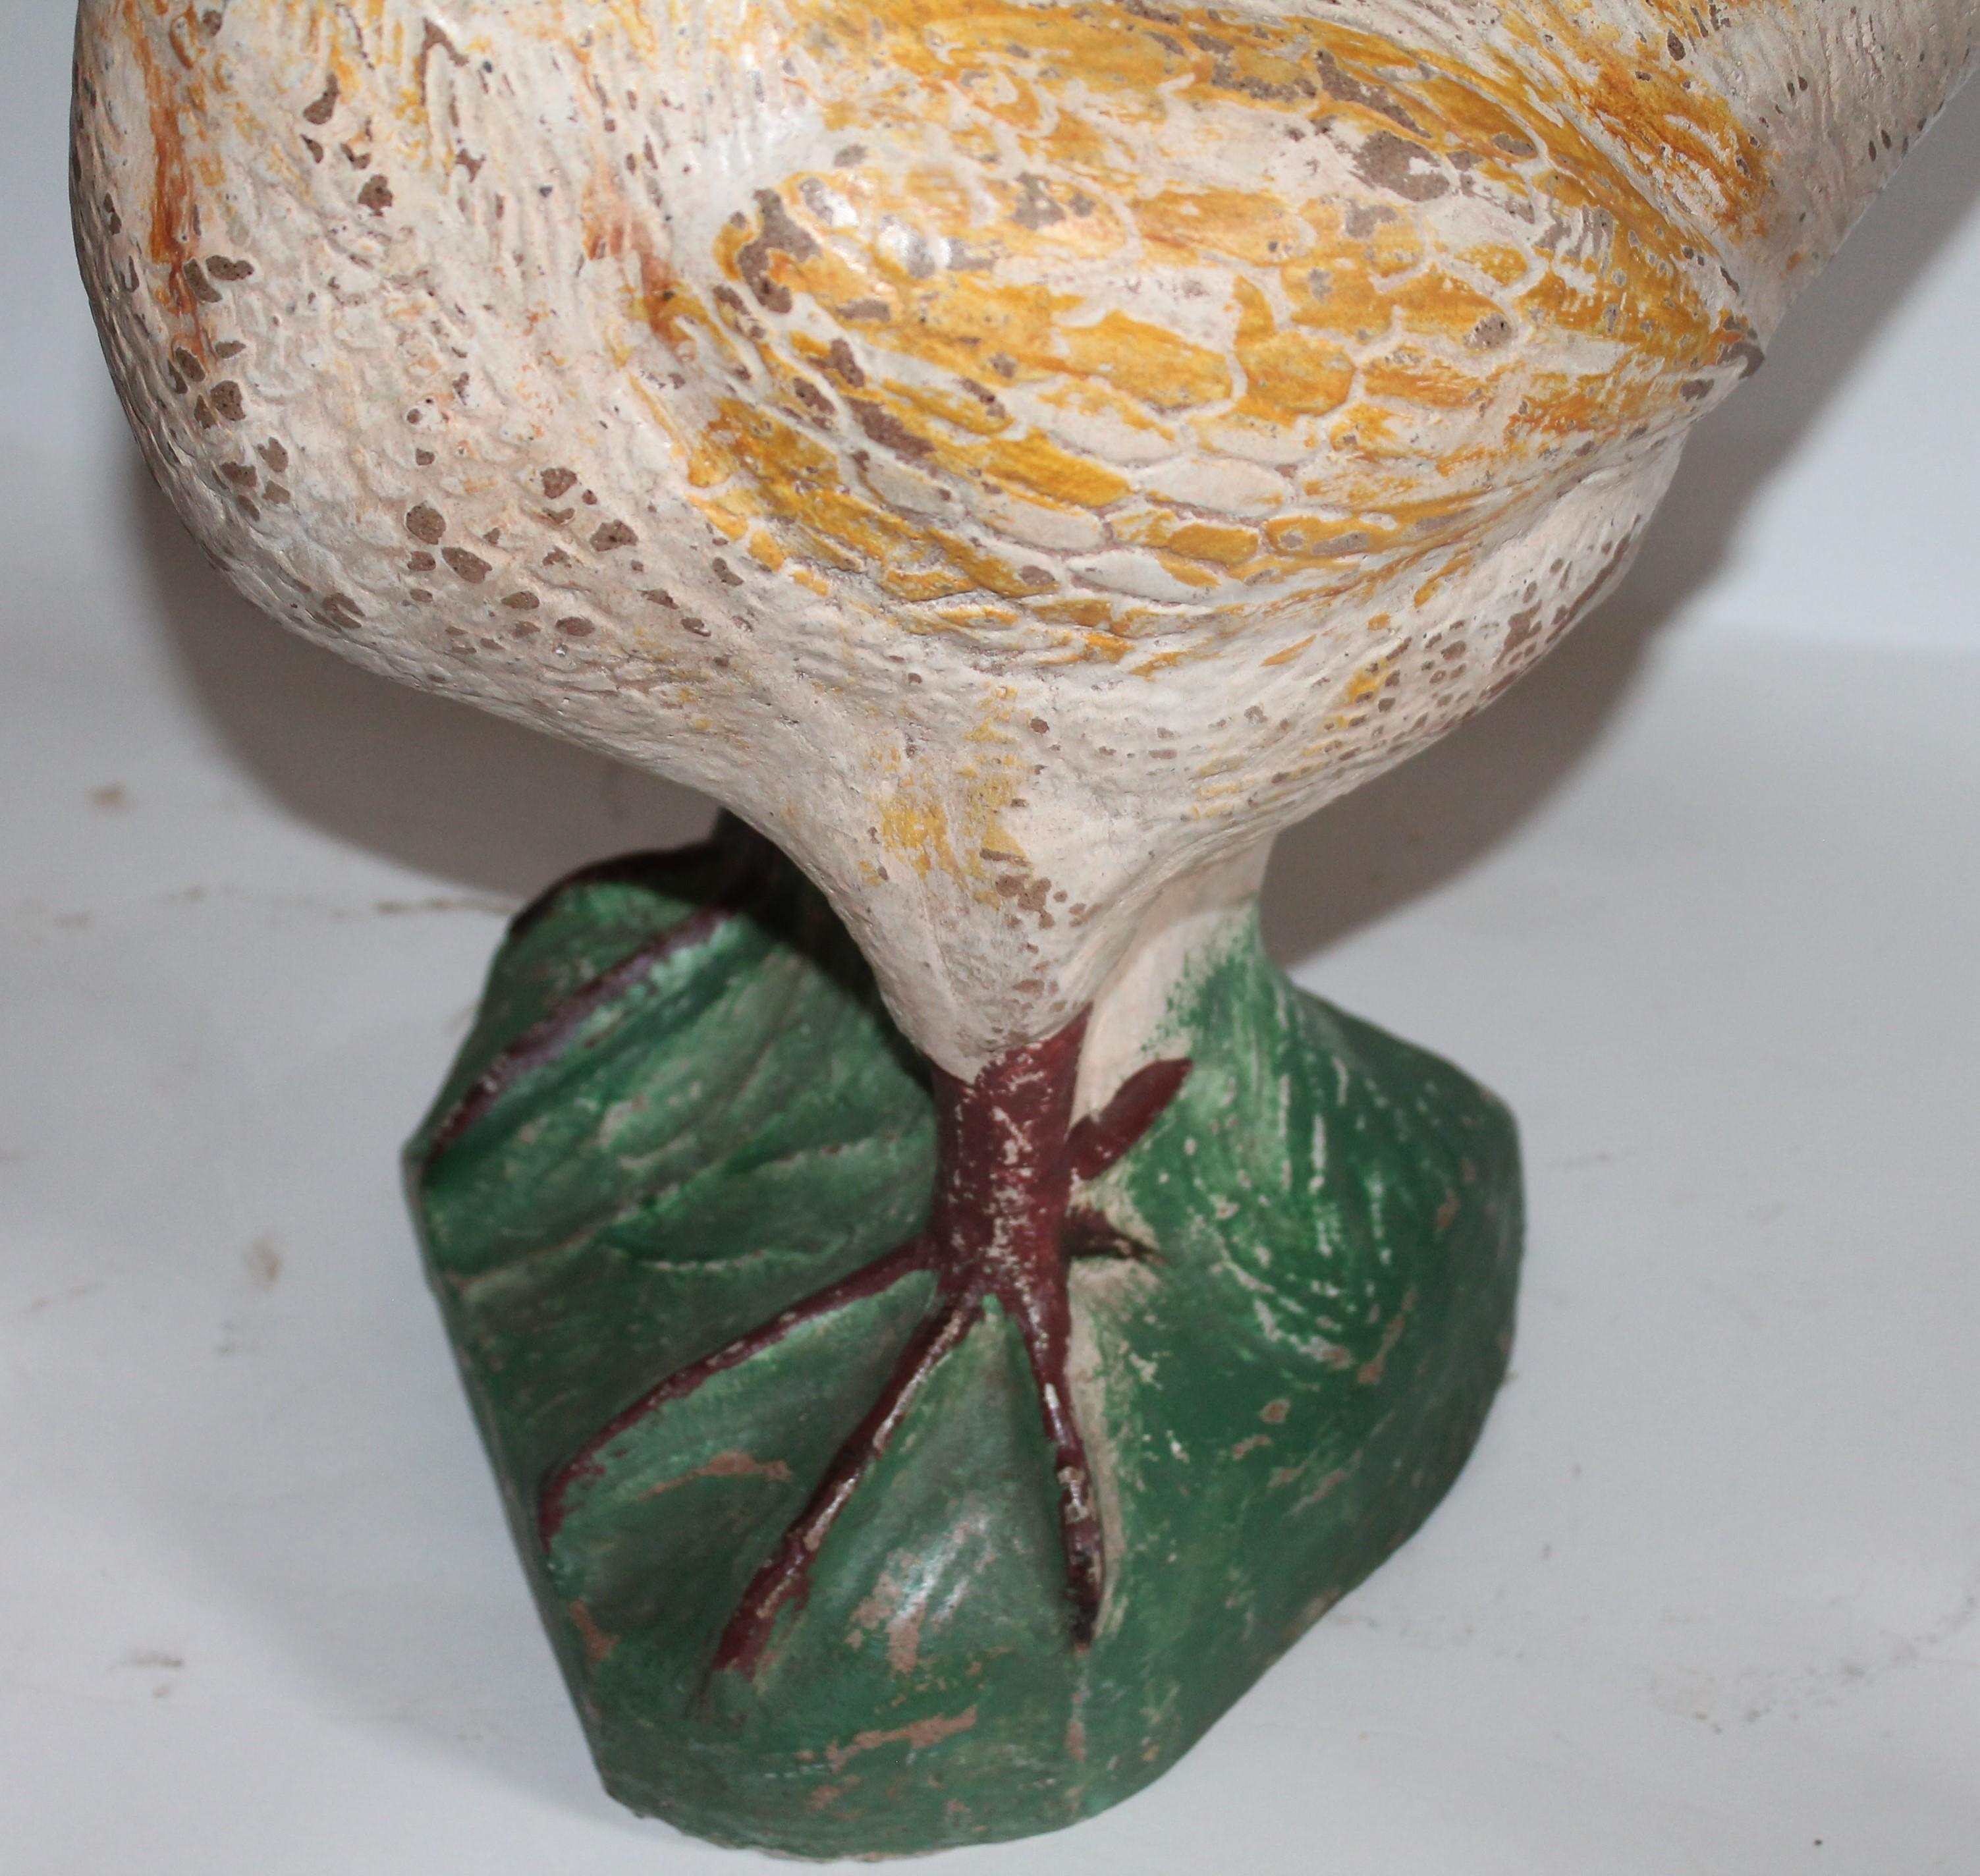 Hand-Painted Painted Chicken of Concrete or Garden Ornament